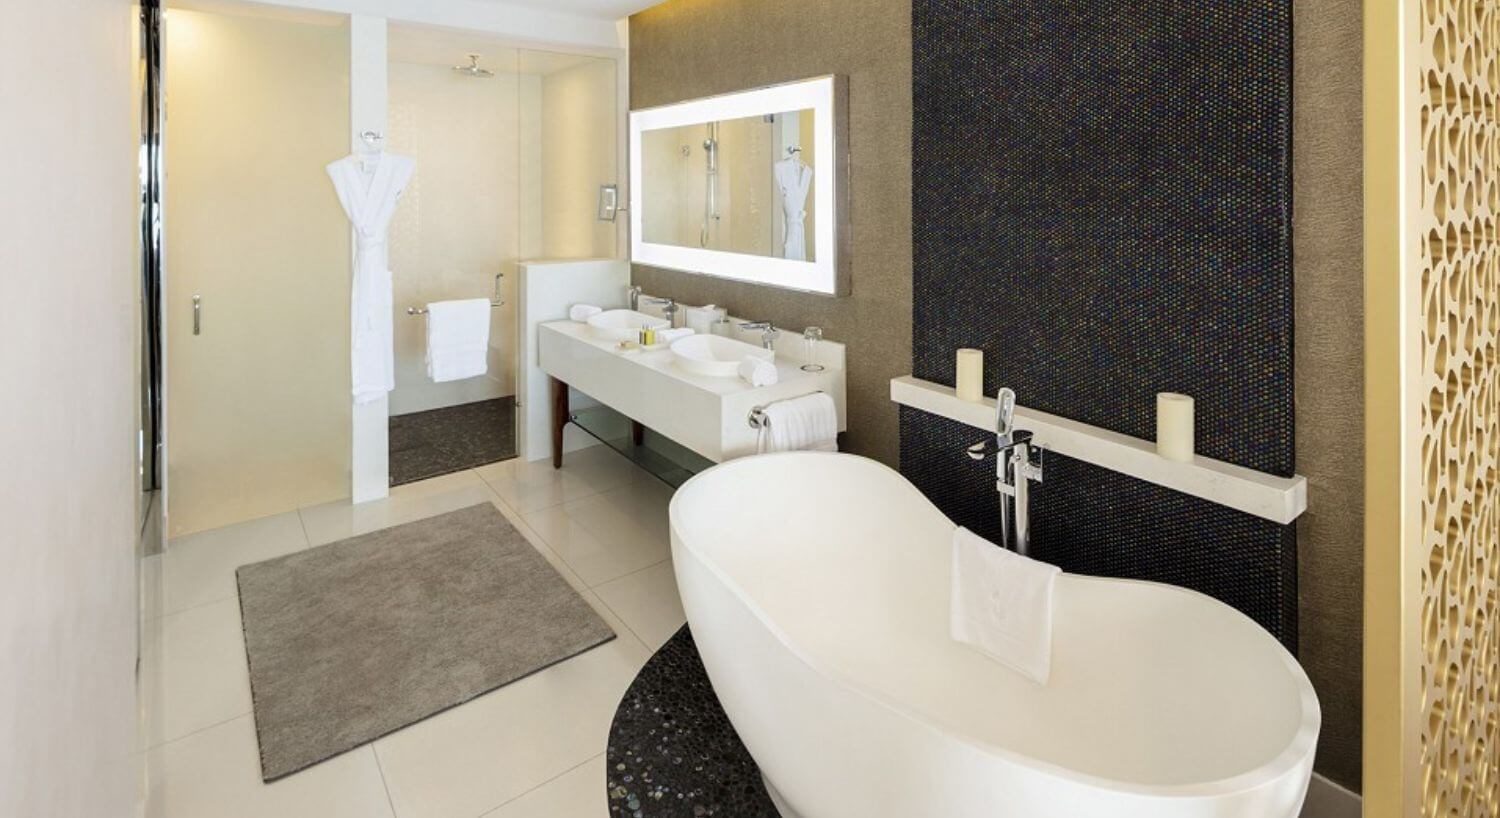 A bathroom with double sinks, a lit mirror over the sinks, a shower and separate deep soaking tub.